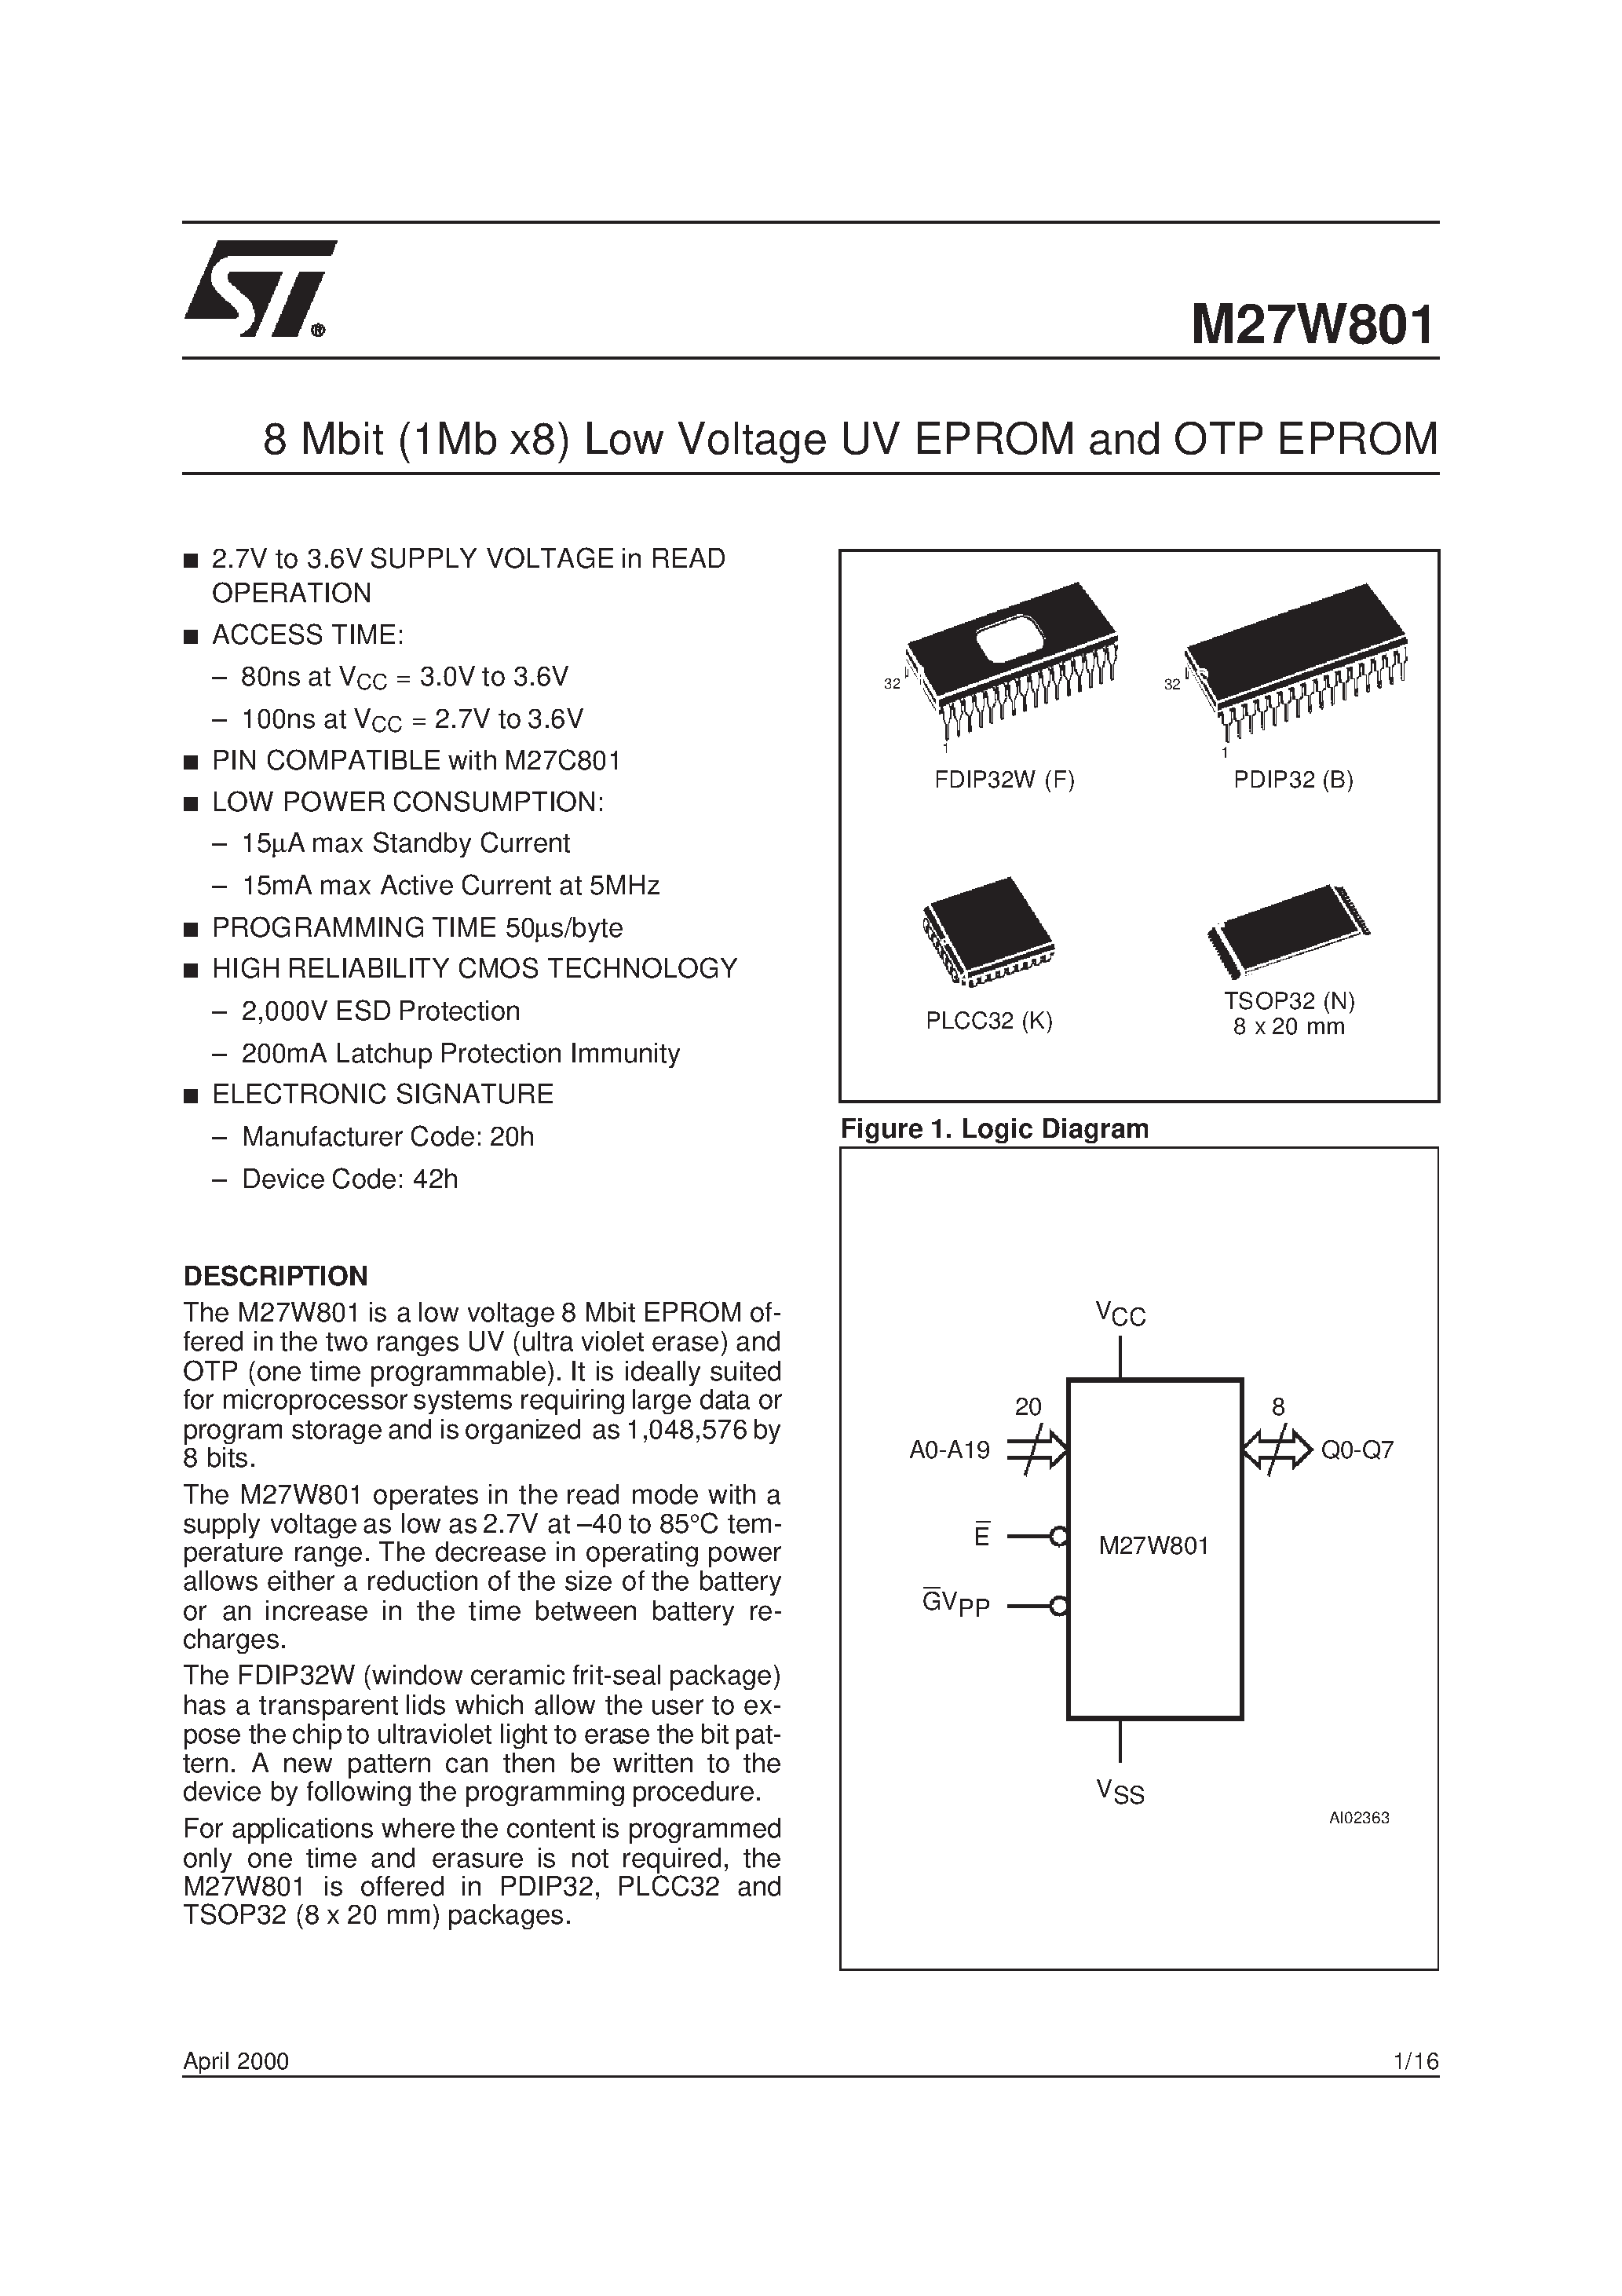 Datasheet M27W801-120K6TR - 8 Mbit 1Mb x8 Low Voltage UV EPROM and OTP EPROM page 1